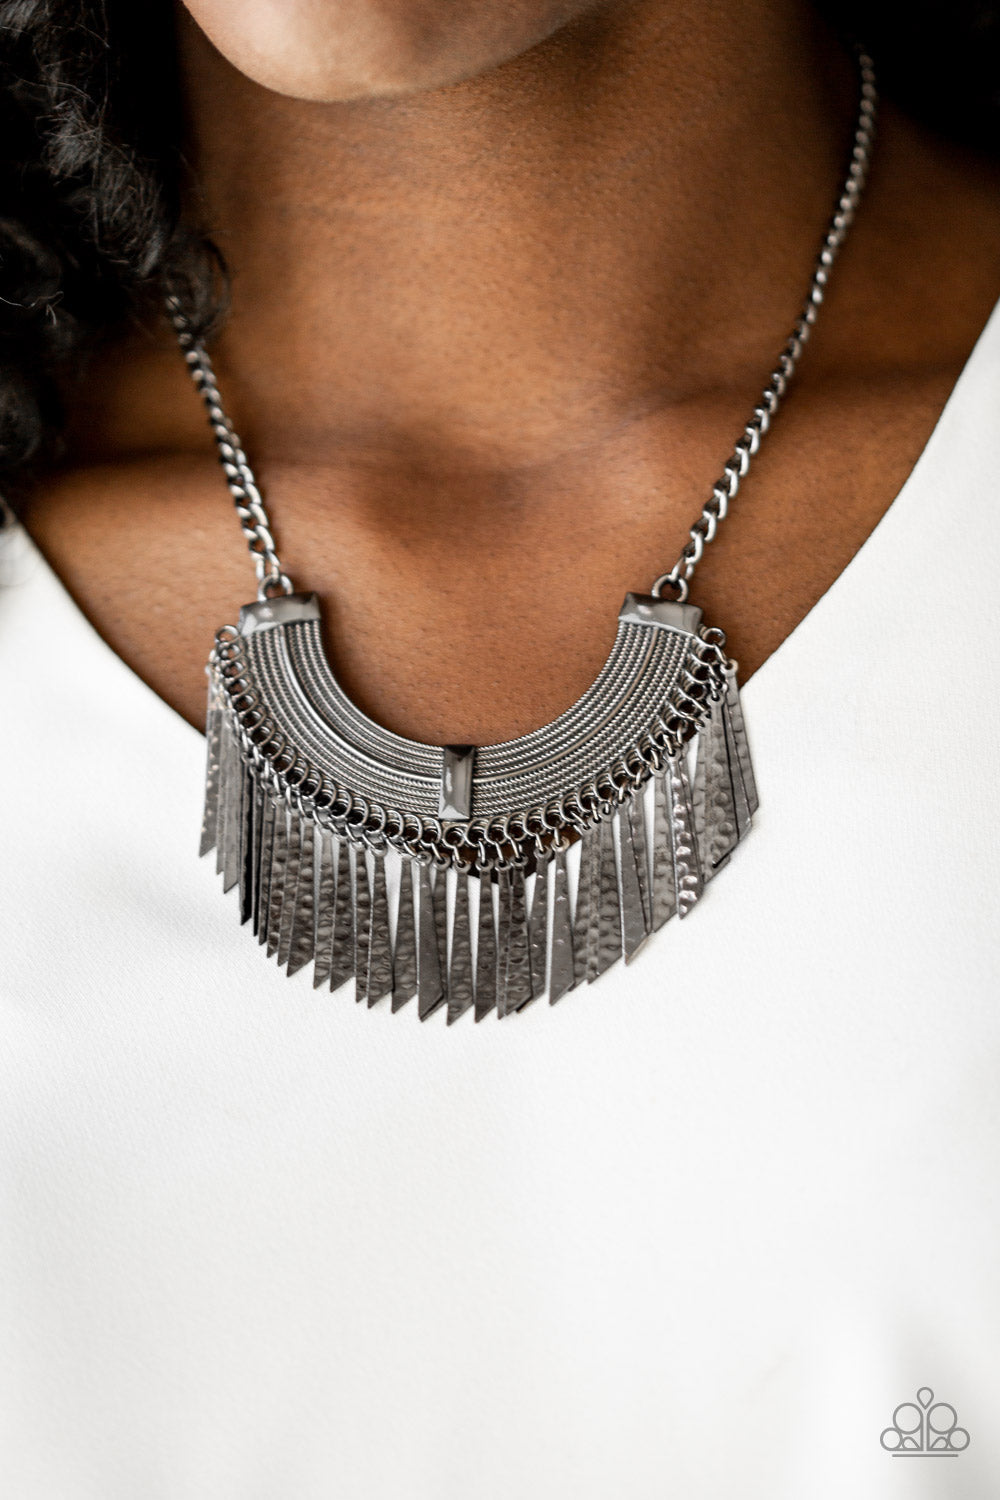 Paparazzi Impressively Incan - Black - Hammered in Shimmery Textures - Necklace & Earrings - $5 Jewelry with Ashley Swint